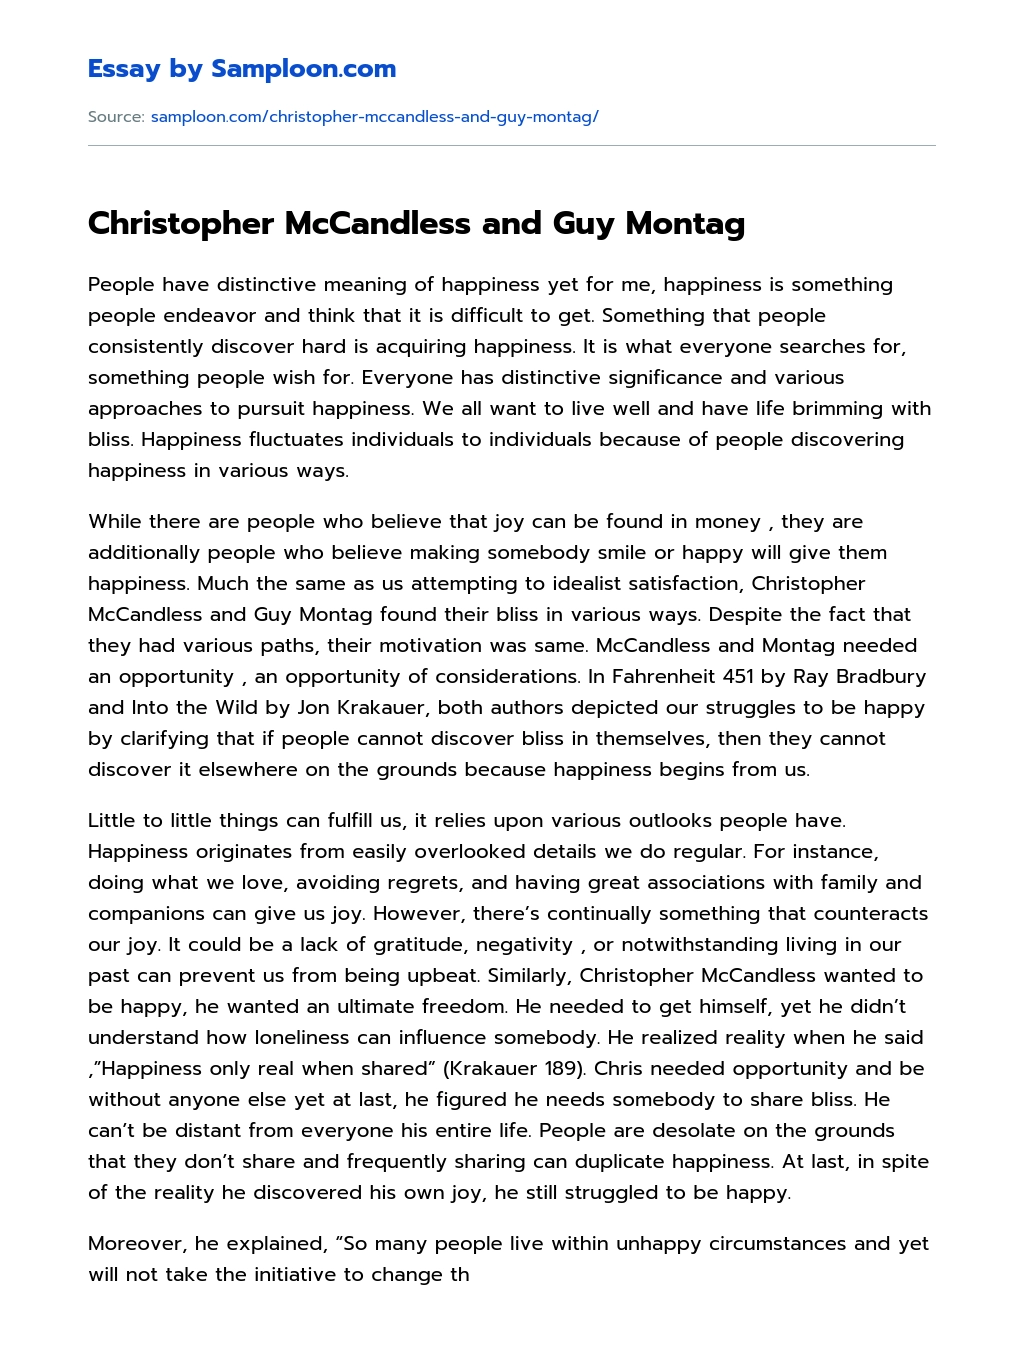 Christopher McCandless and Guy Montag Analytical Essay essay